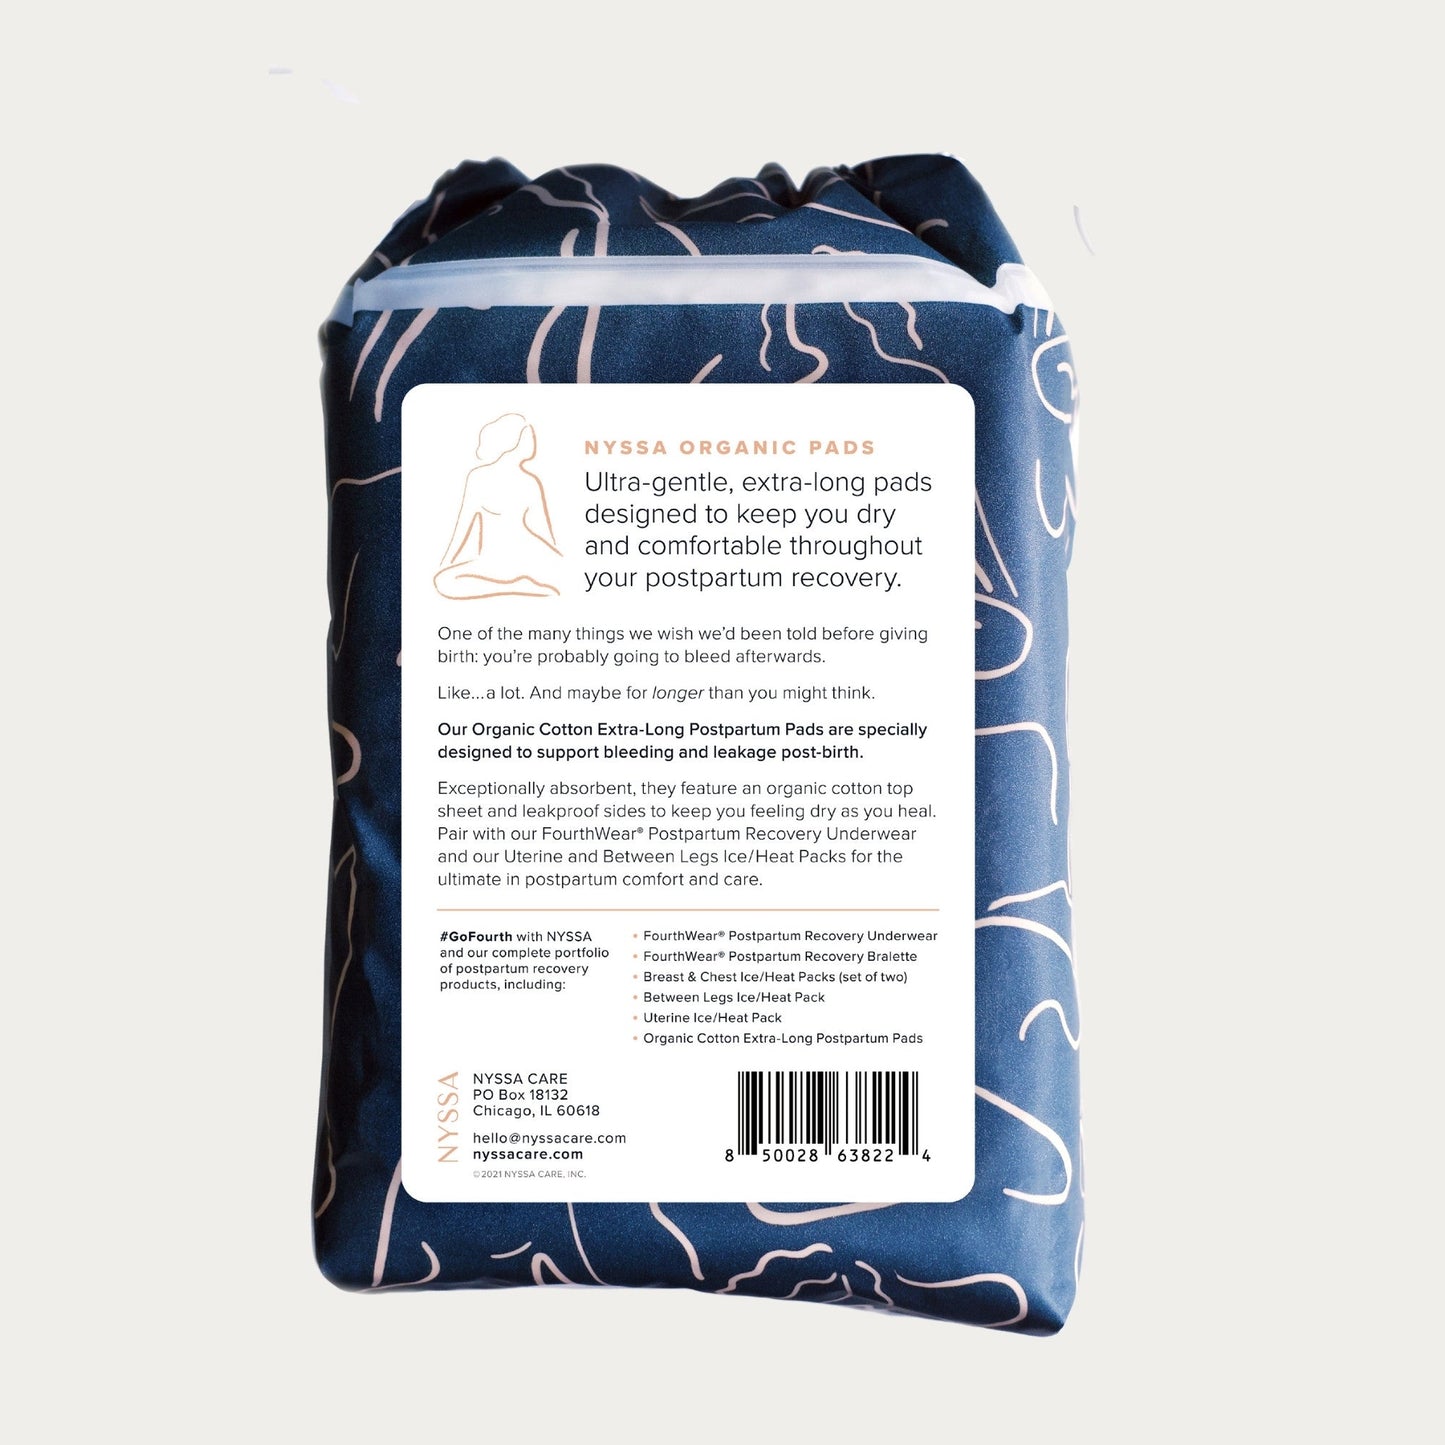 Organic Cotton Extra-Long Postpartum Pads, back of pack